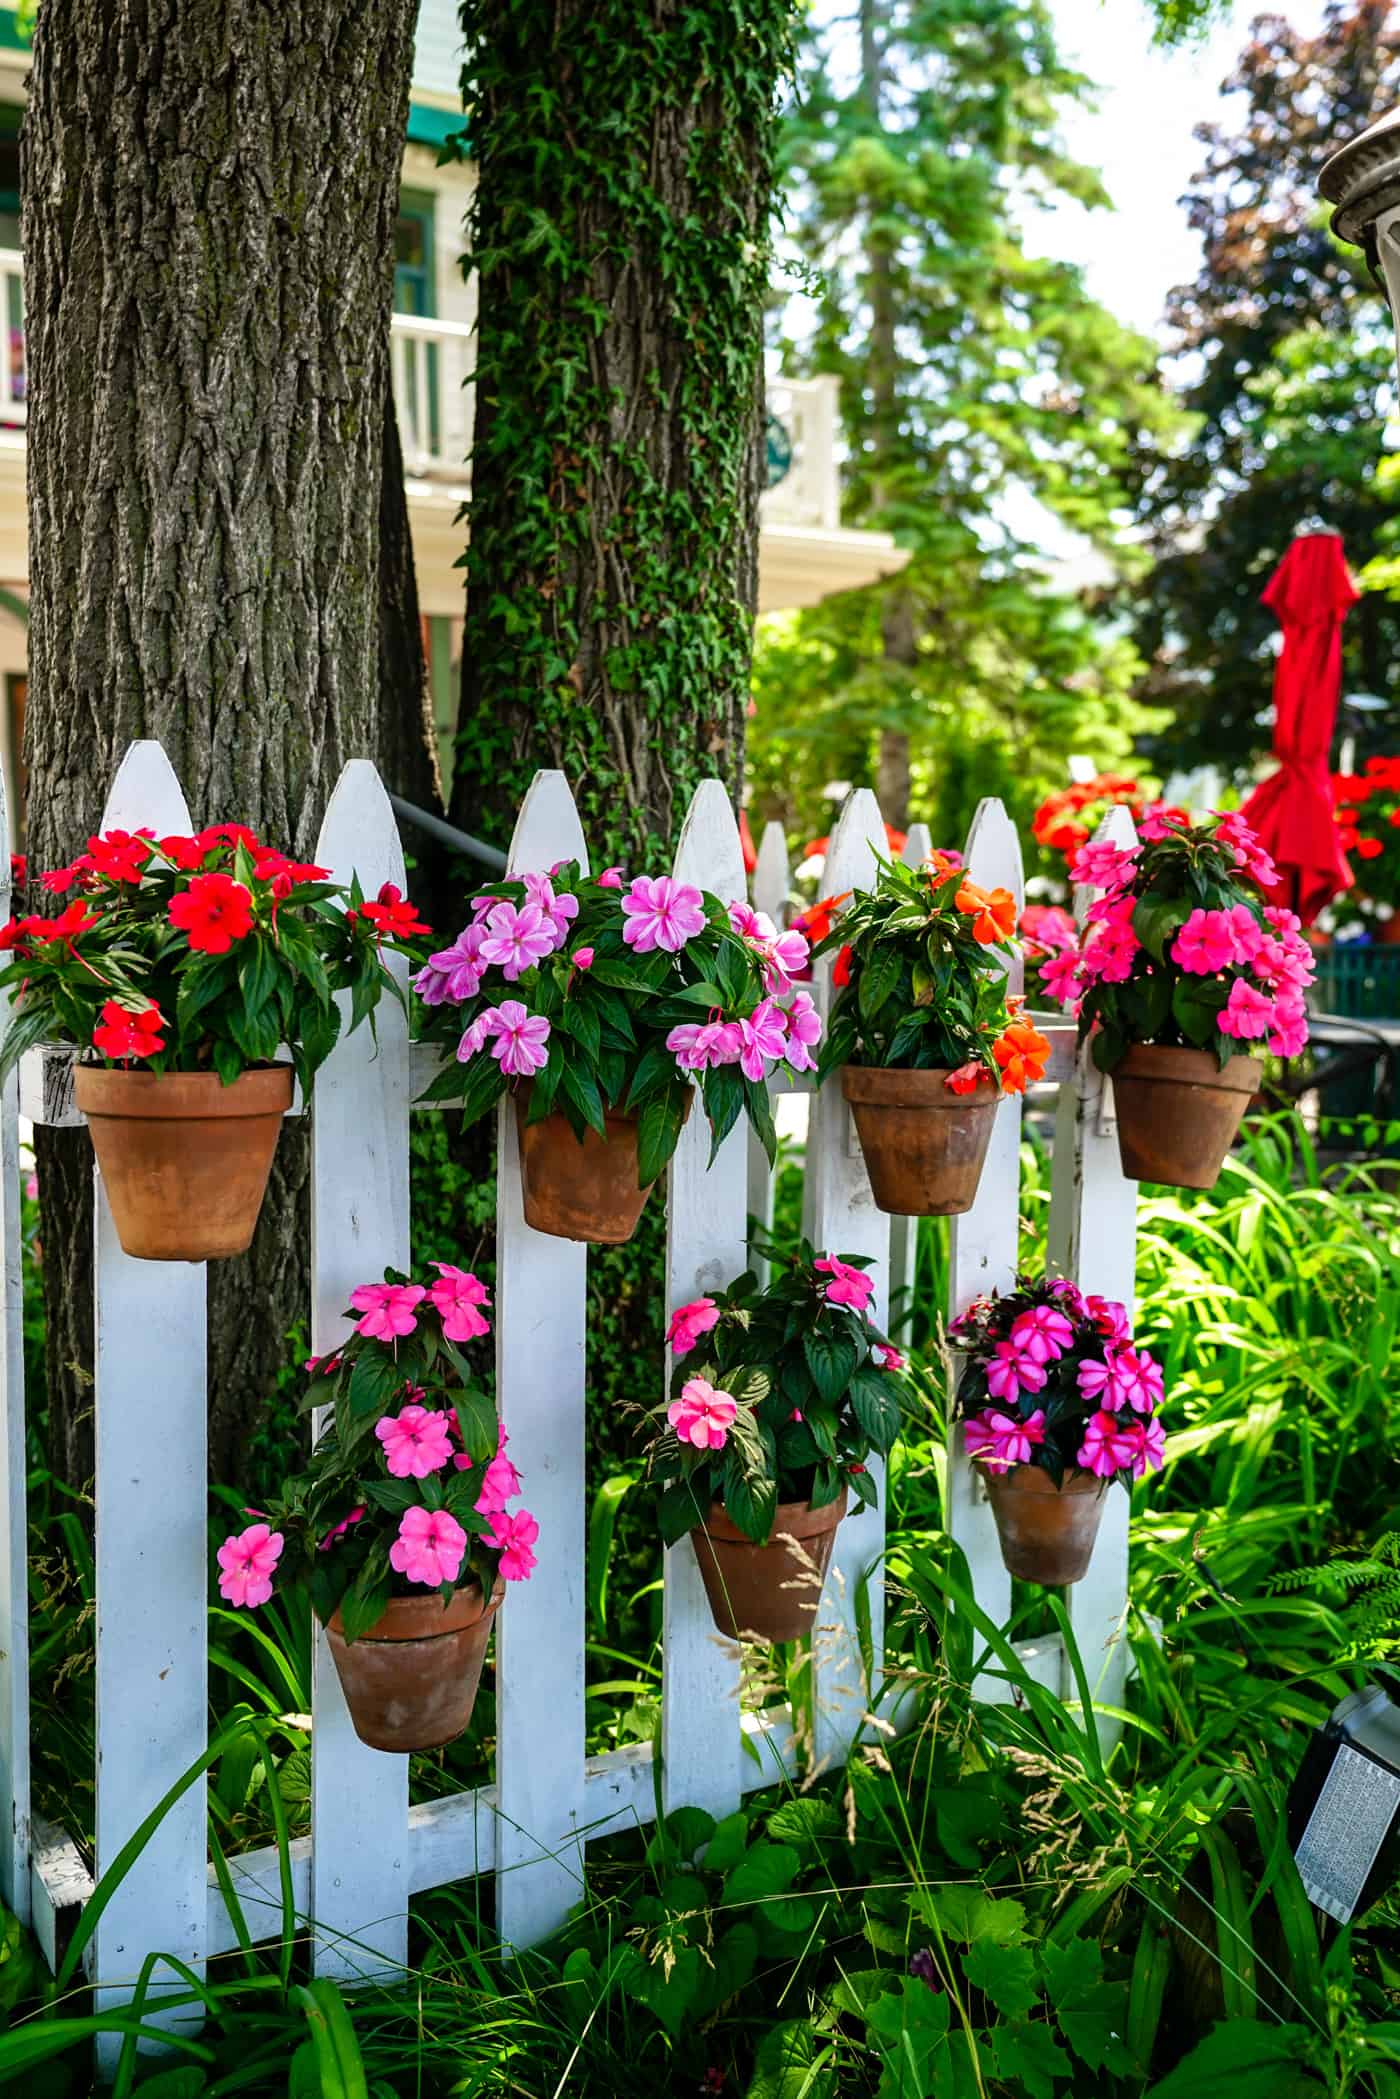 Downtown Saugatuck Michigan with a white picket fence and flowers